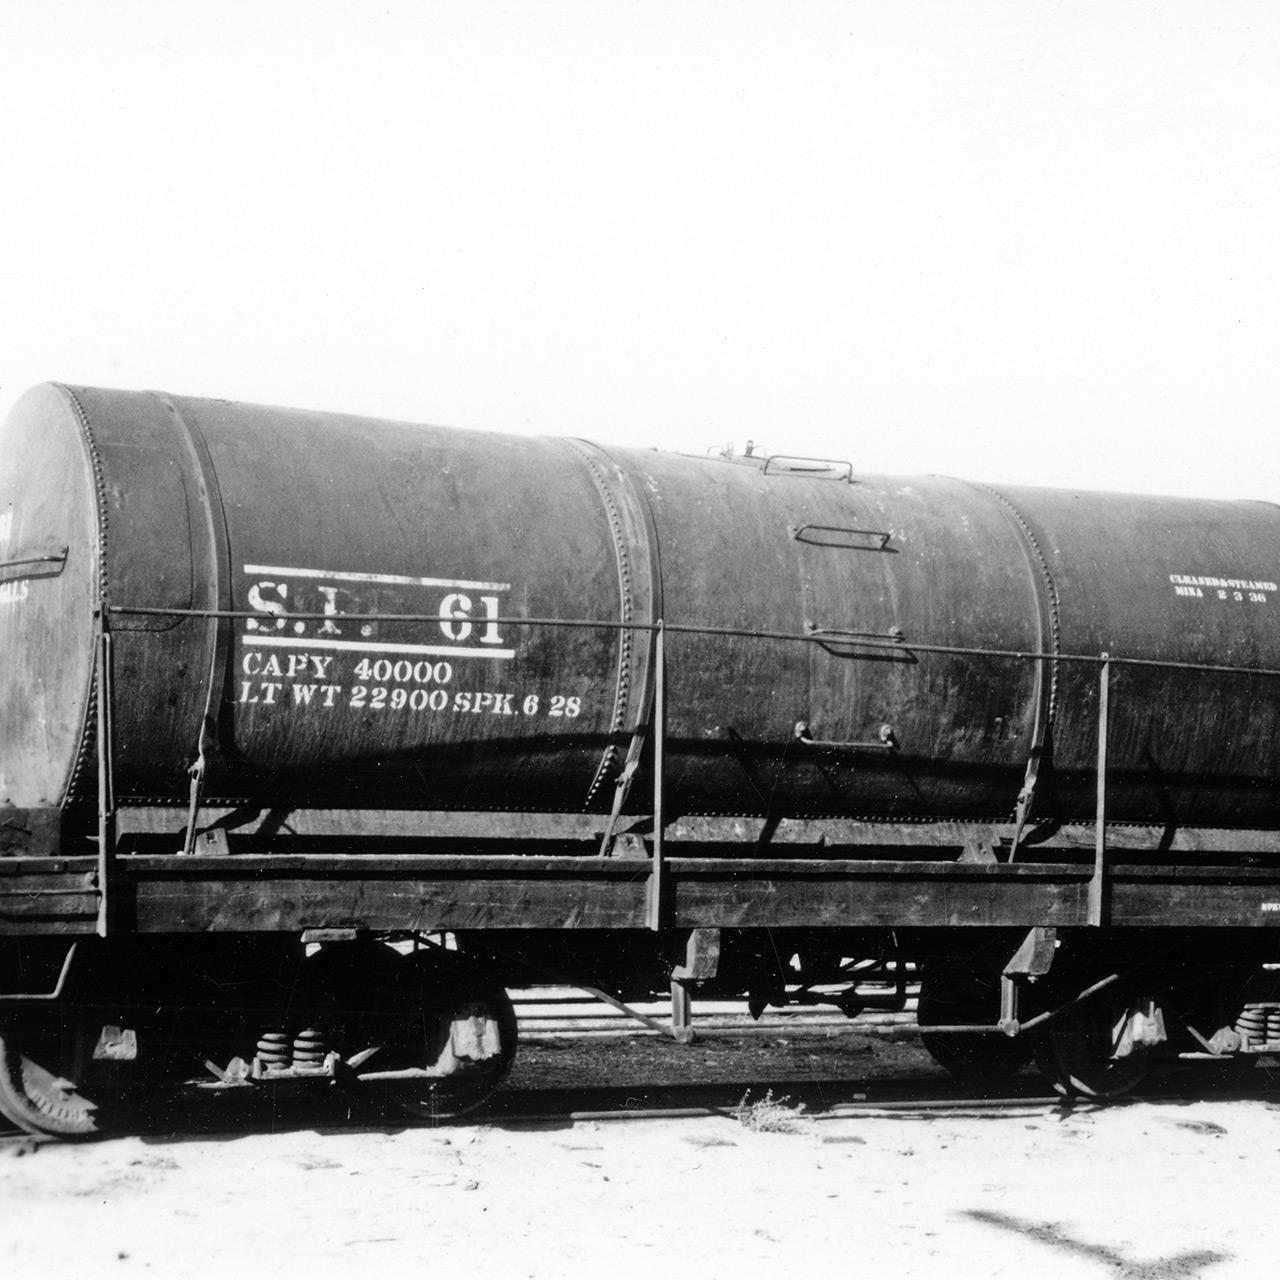 Water Car #61, location unknown